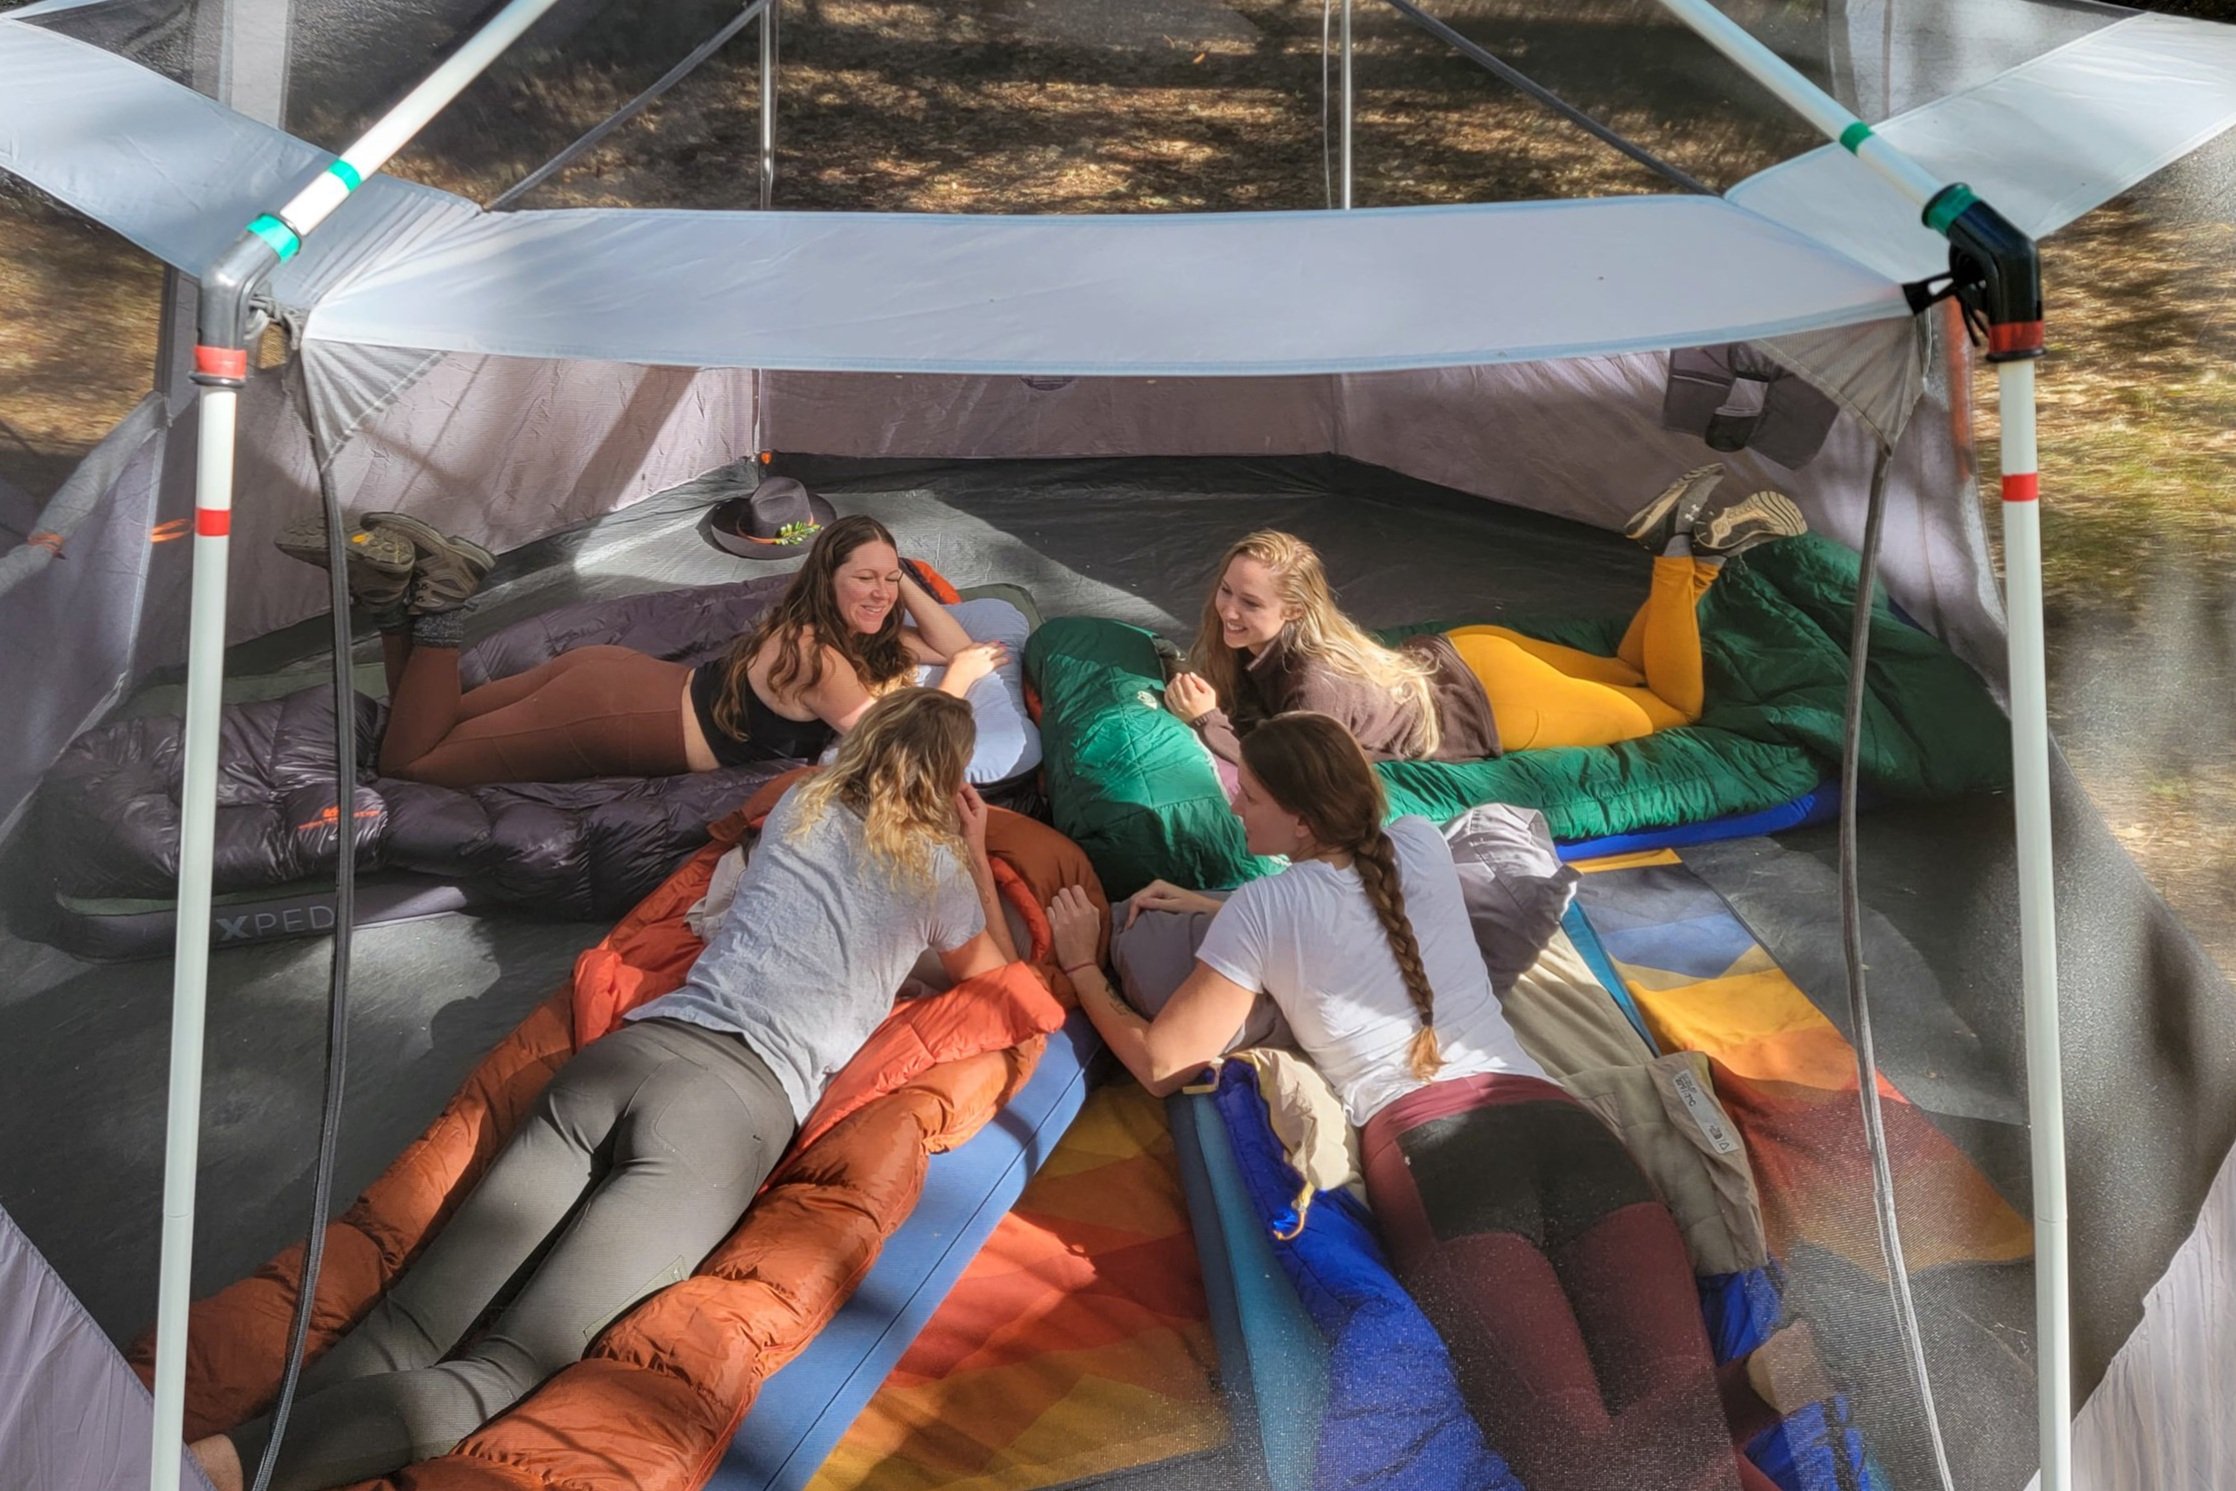 A group of women laying on sleeping bags in a large camping tent